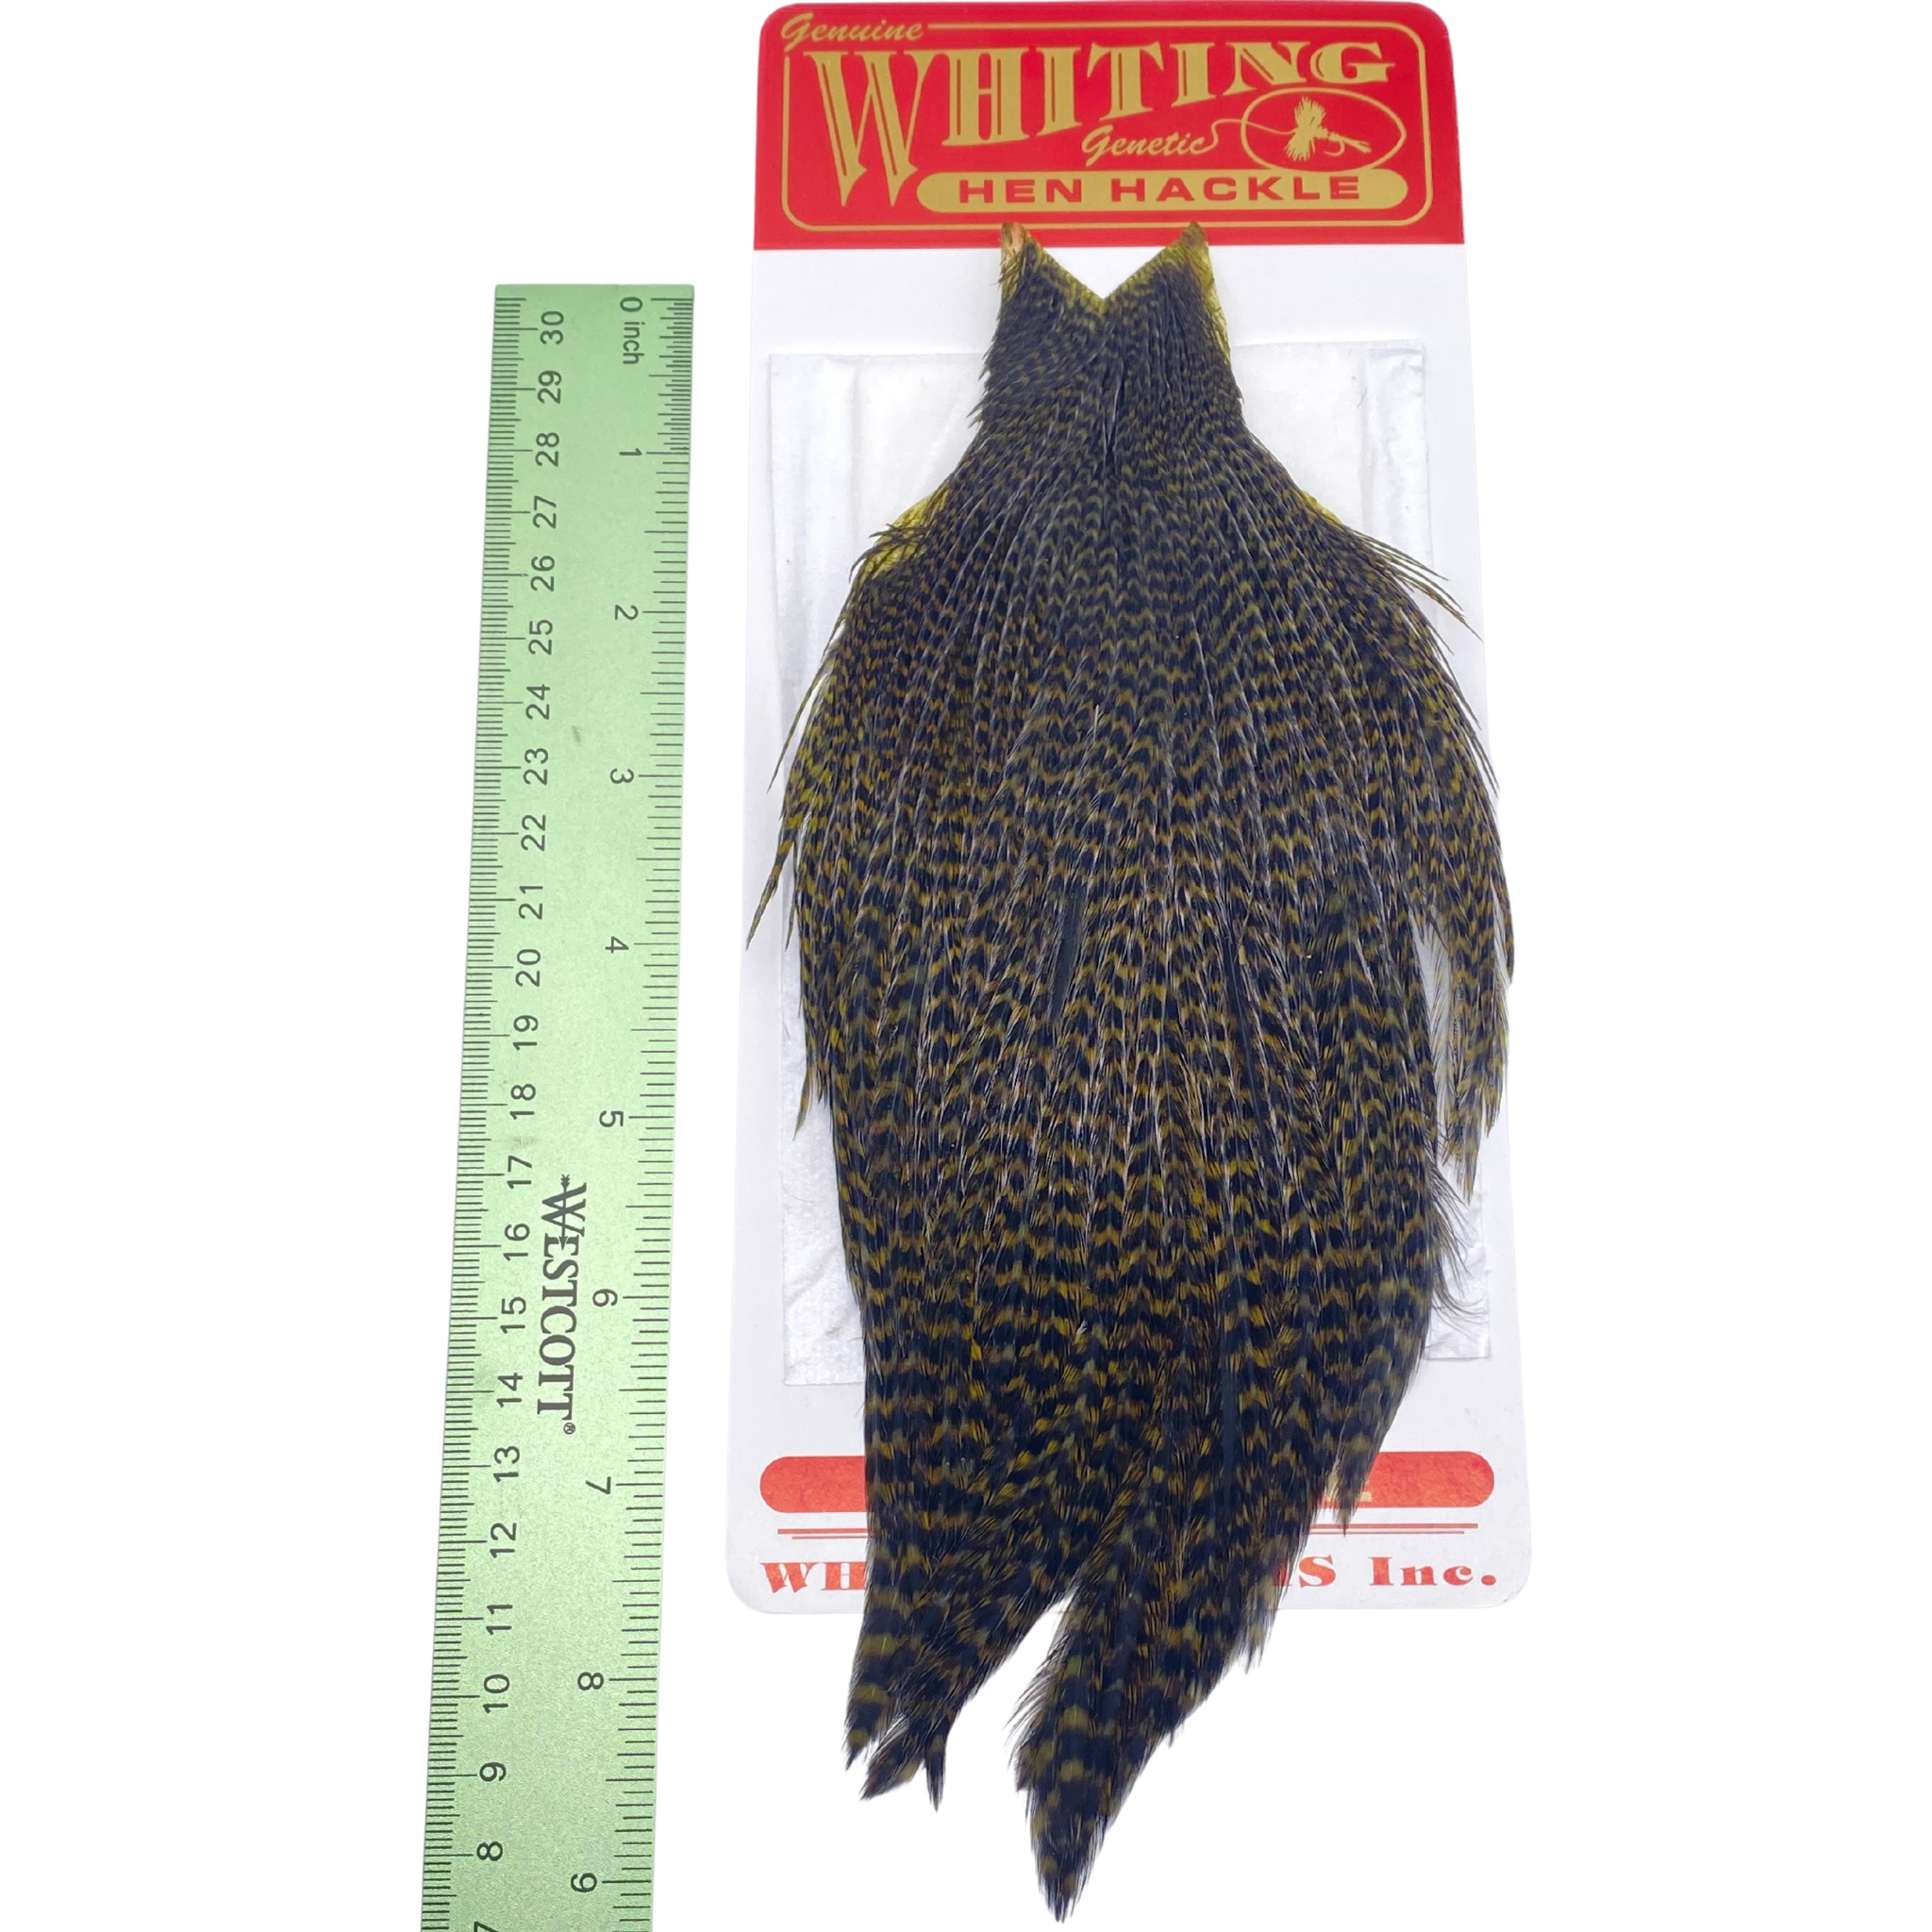 Whiting Hen Cape - ( WHITING FARMS, INC)